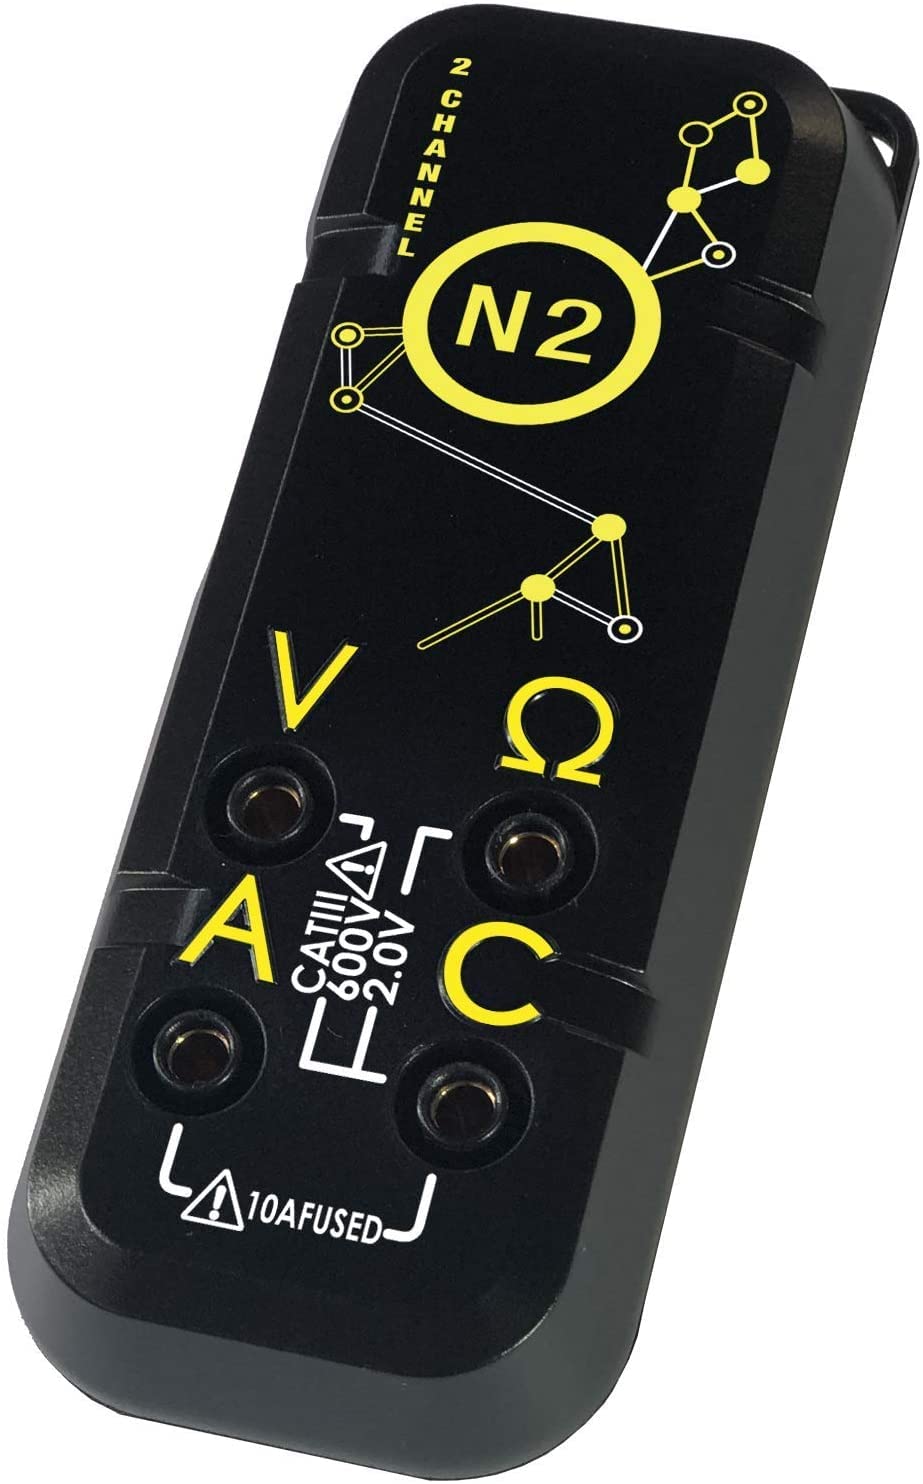 N2 Neuron Graphing Meter & Diagnostic System